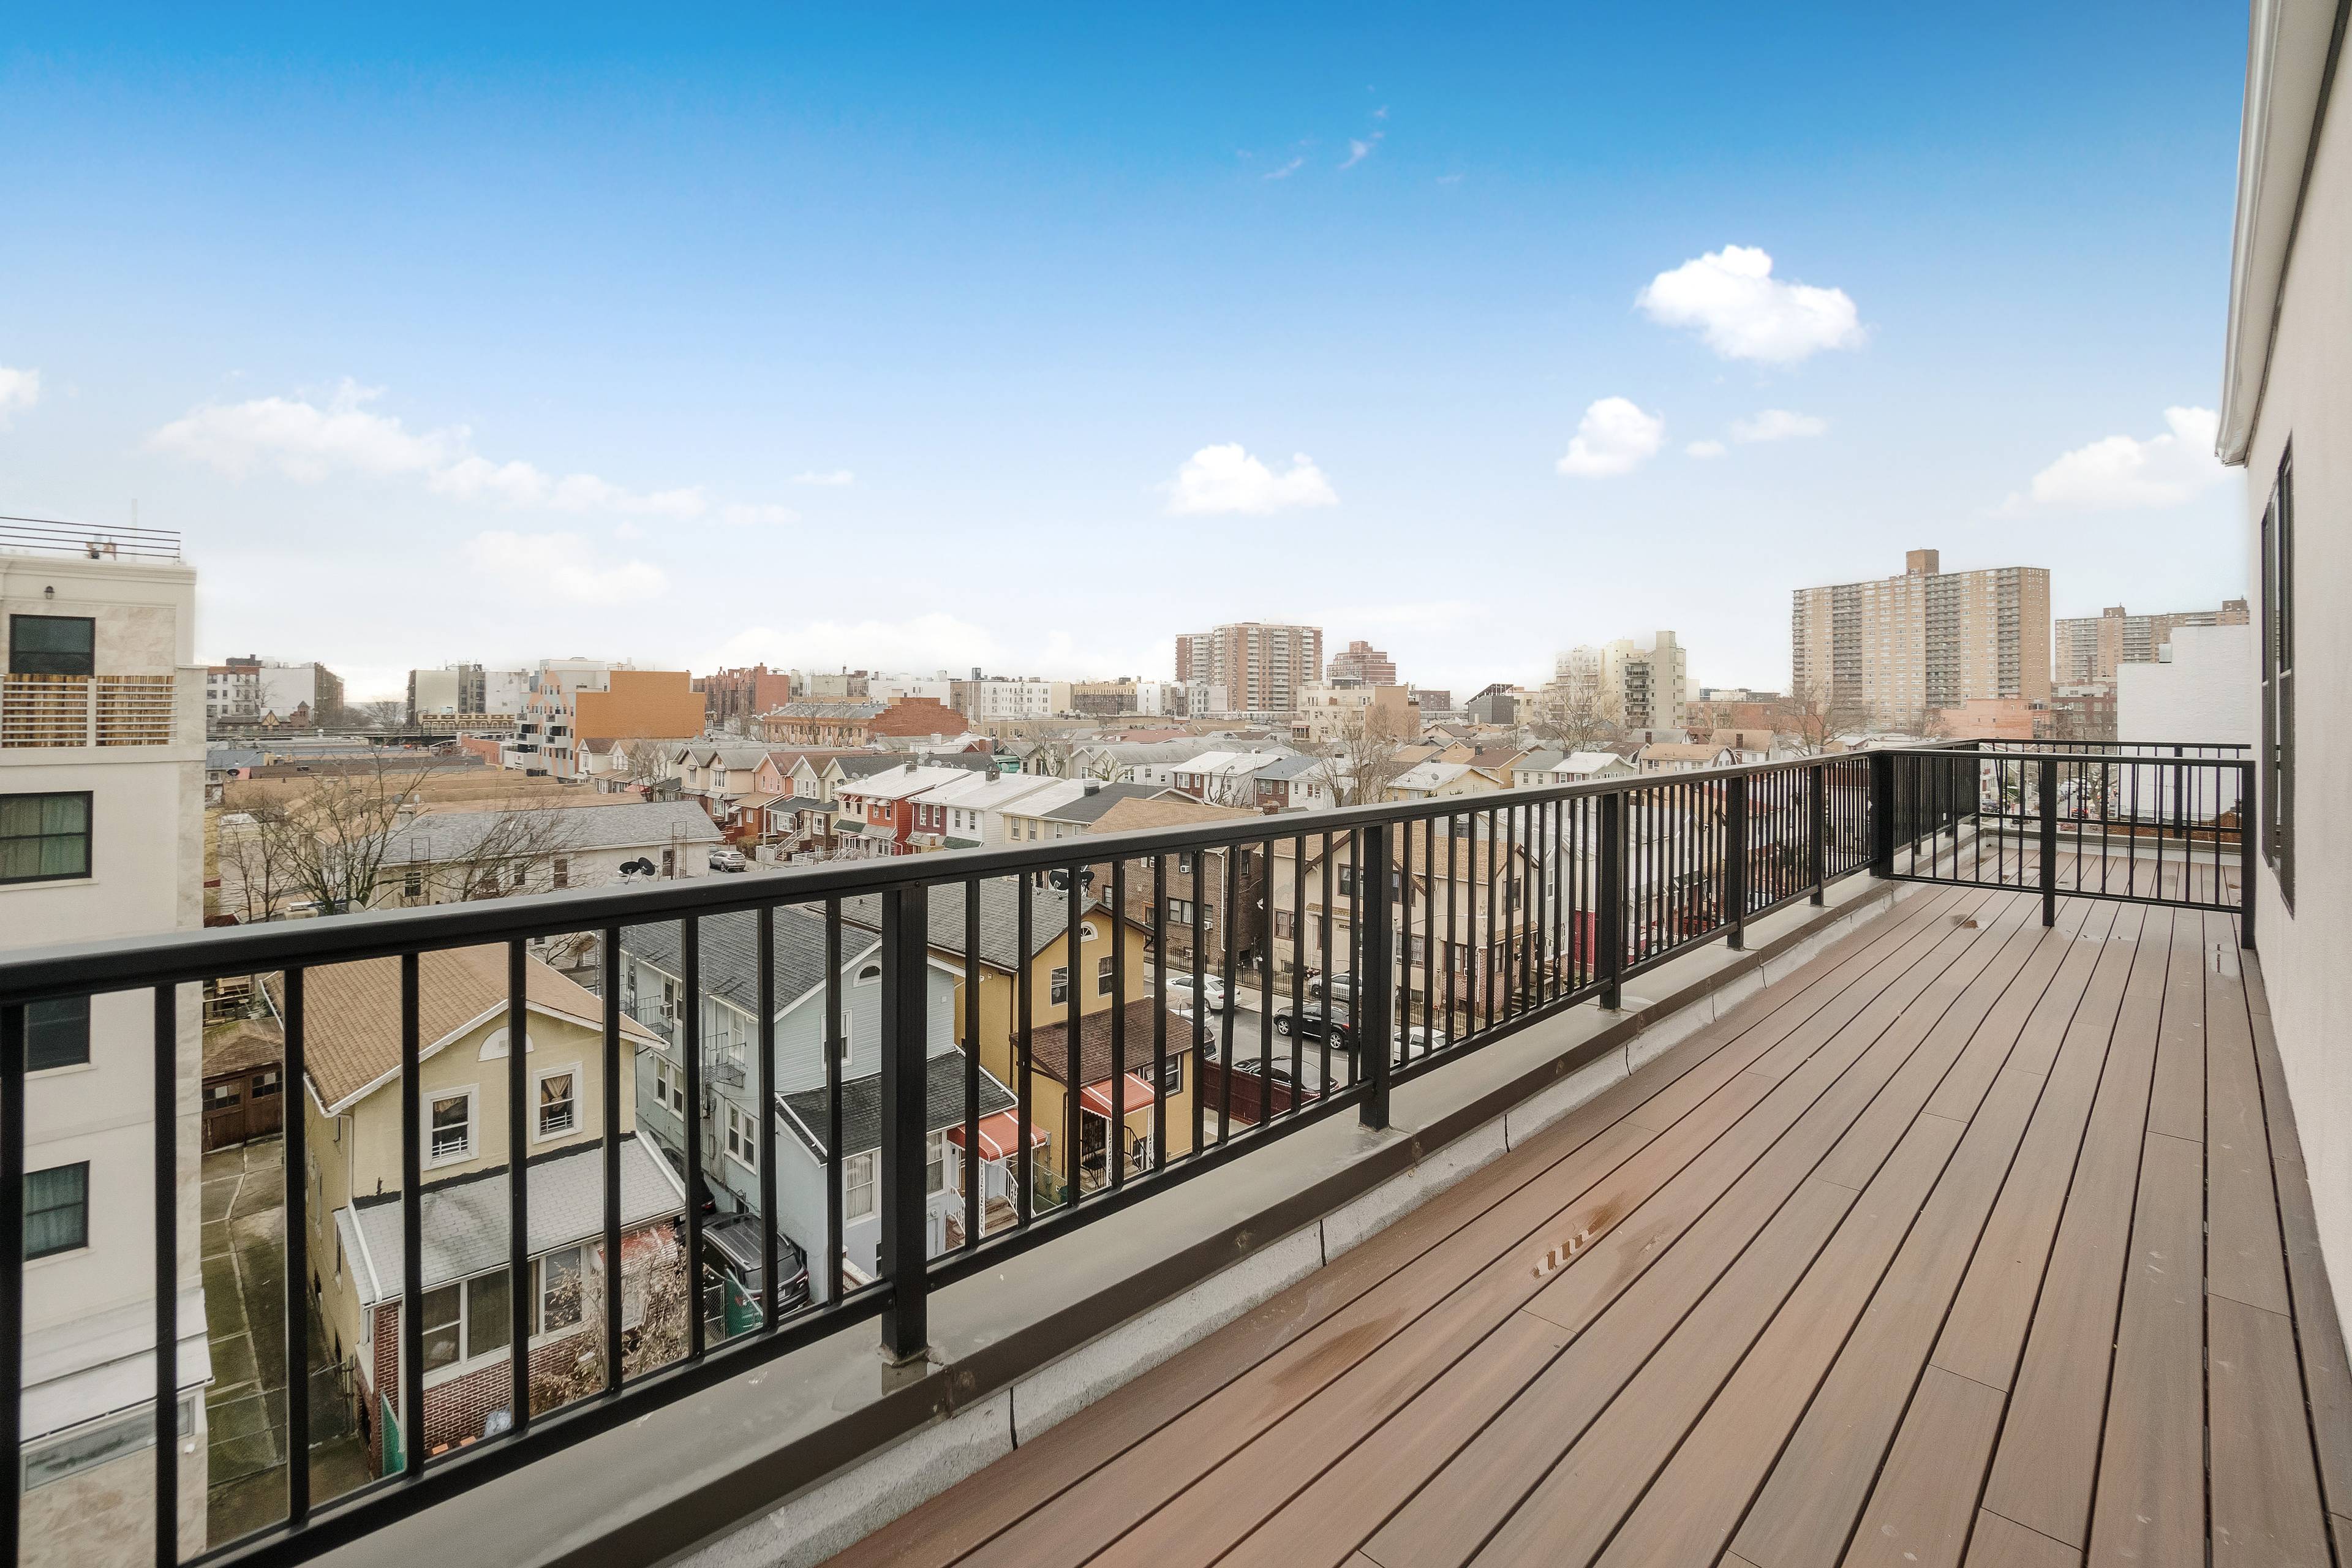 Looking for a perfectly laid out duplex three bedroom condo in prime South Brooklyn ?